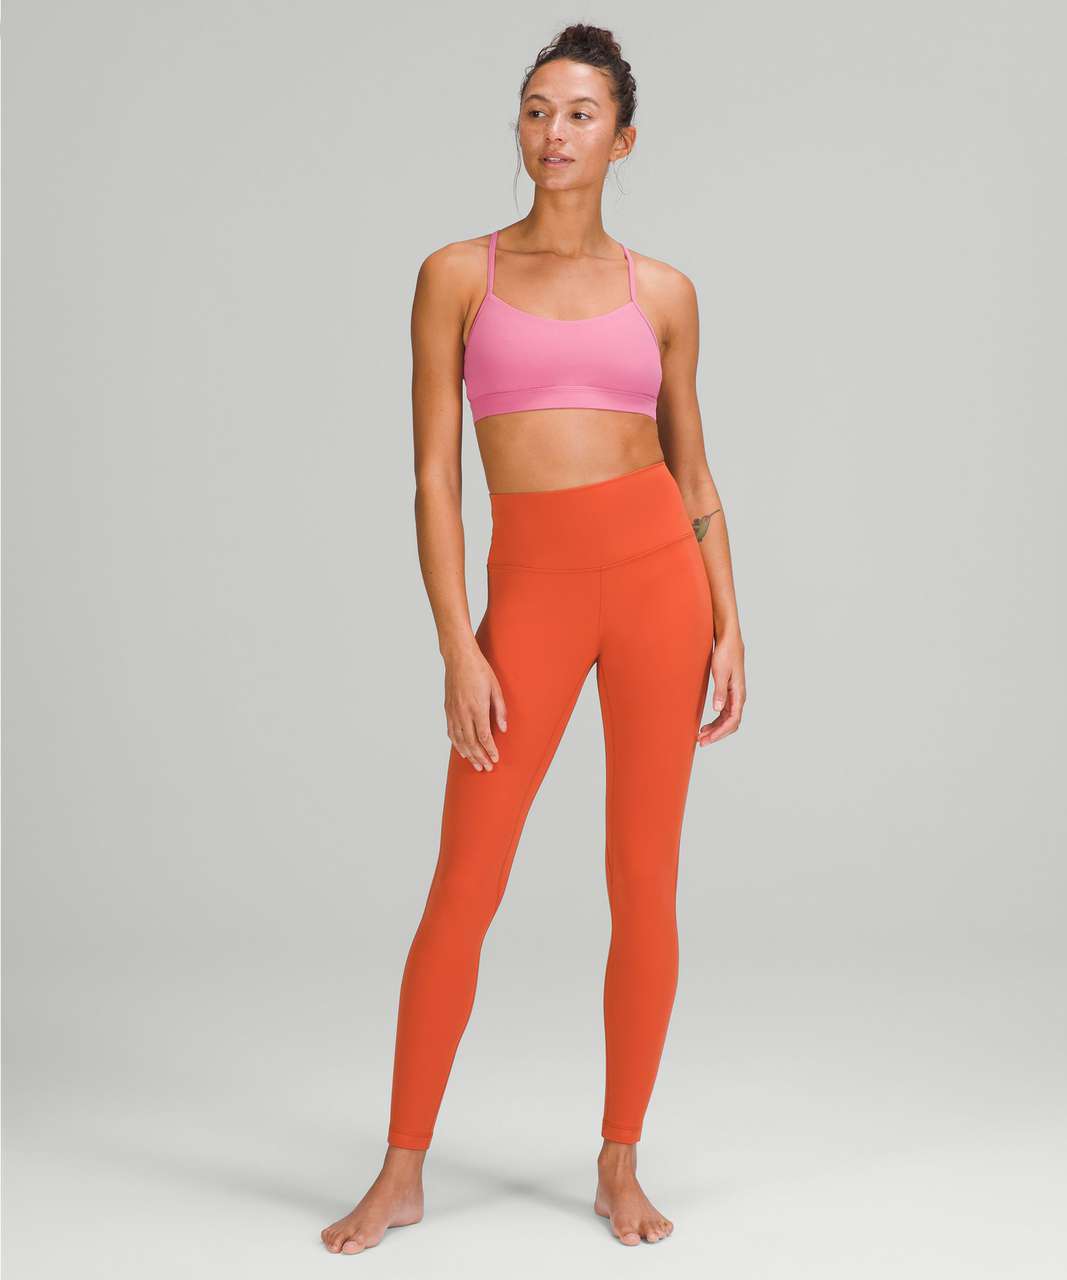 Lululemon Flow Y Bra Pink - $60 New With Tags - From Briana